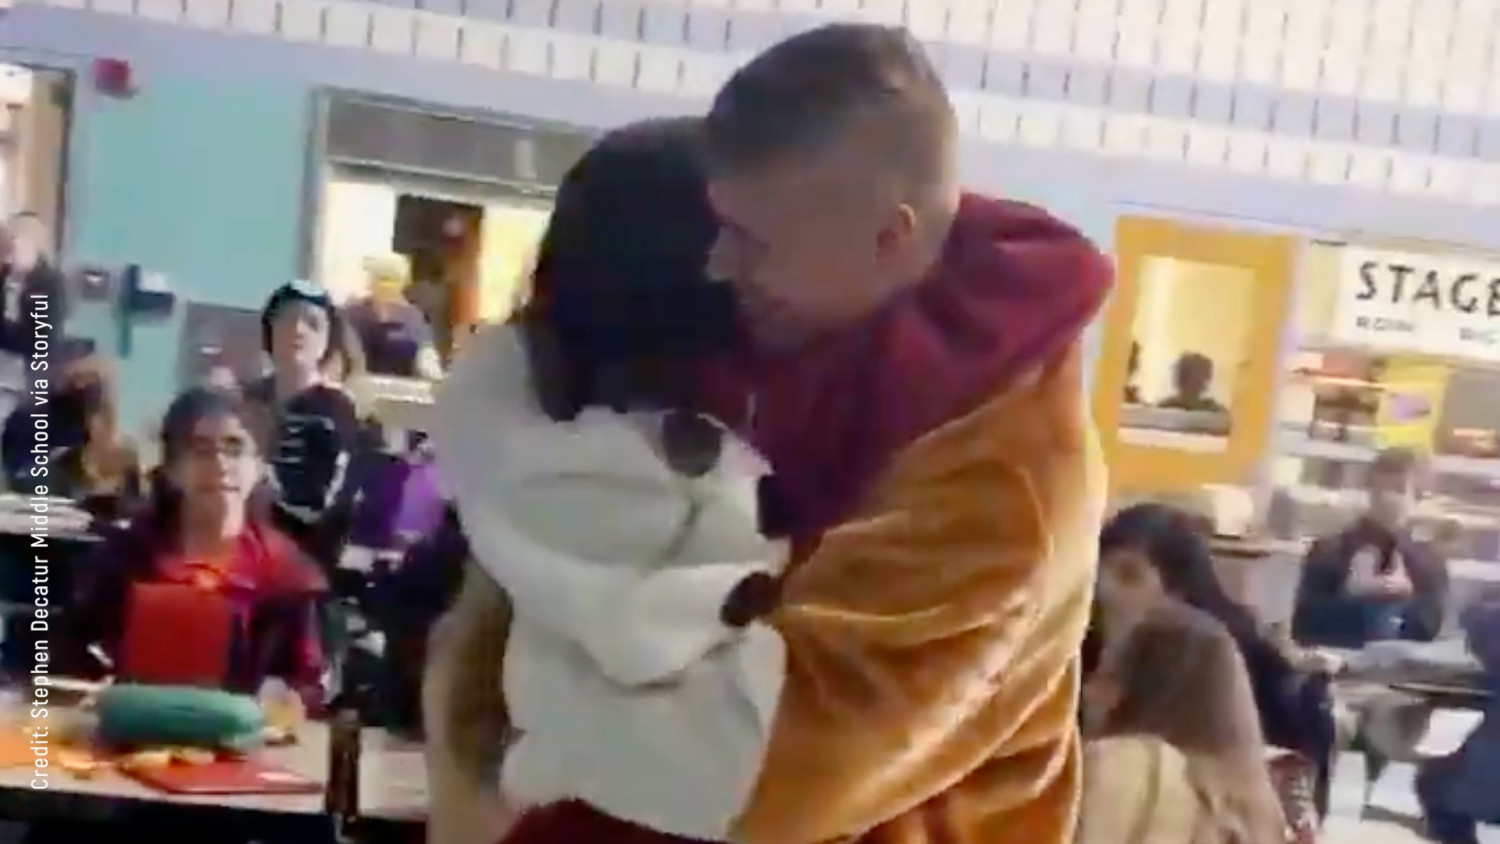 Emotional Homecoming Video: Father Surprises Daughter After 7 Months Duty Overseas